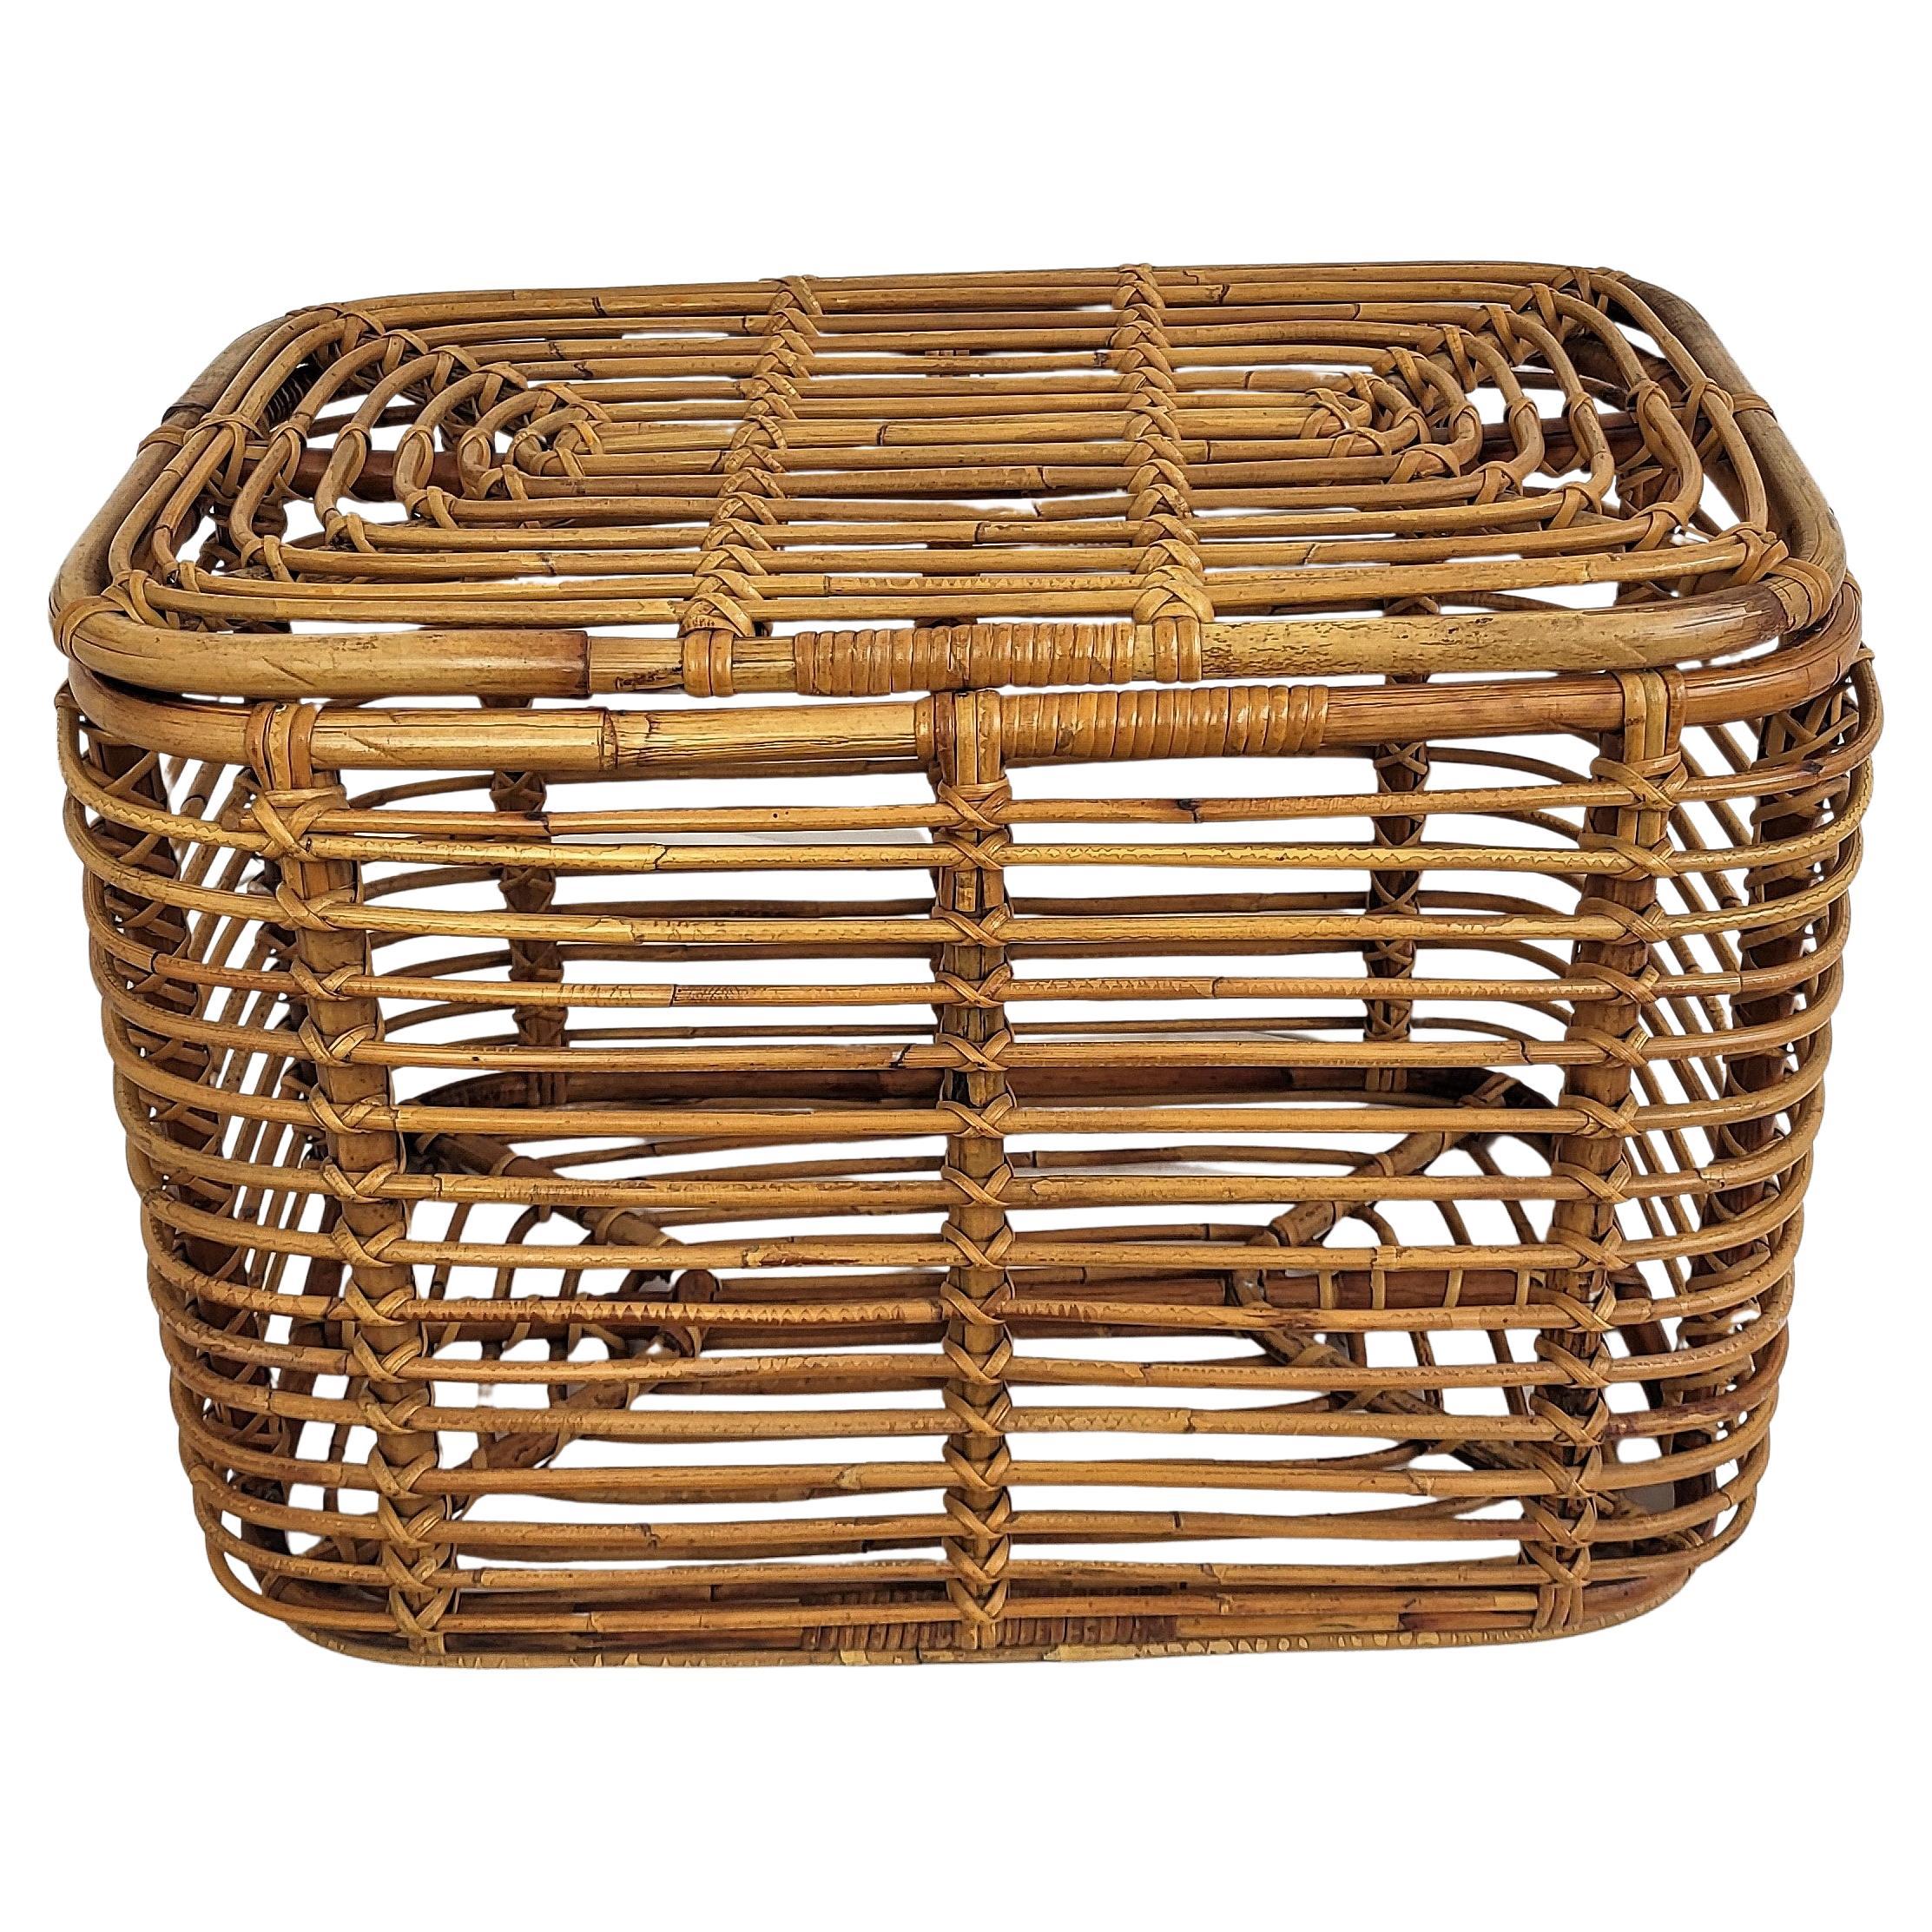 1960s Italian Bamboo Rattan Bohemian French Riviera Basket Container